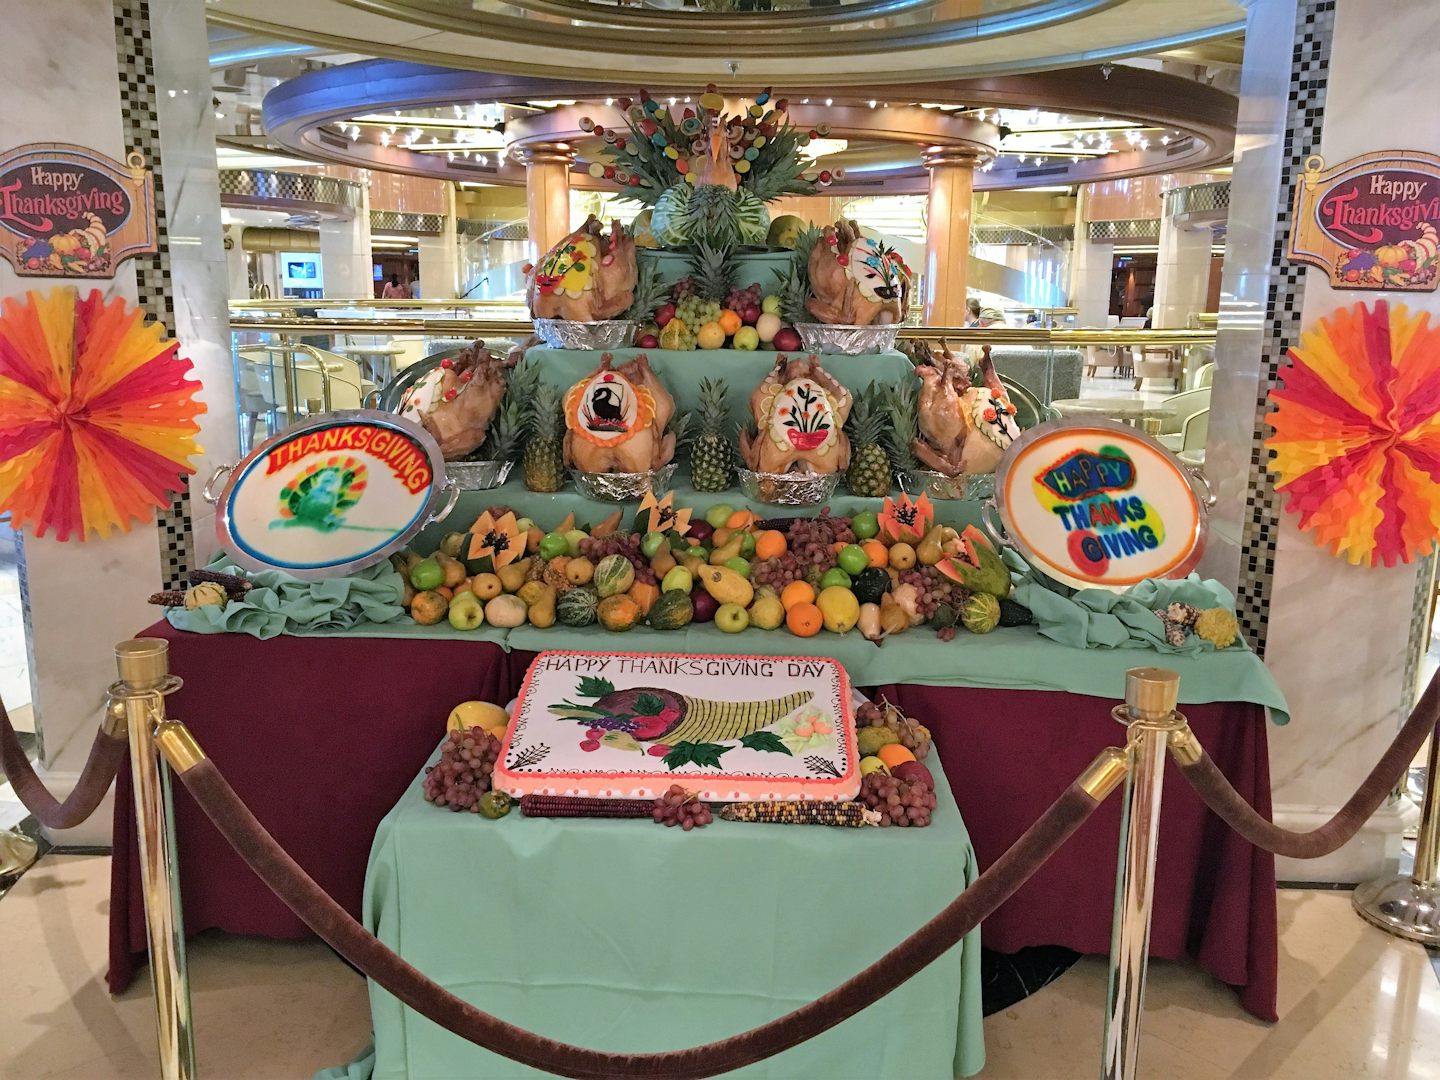 Thanksgiving Display in the Piazza - Regal Princess